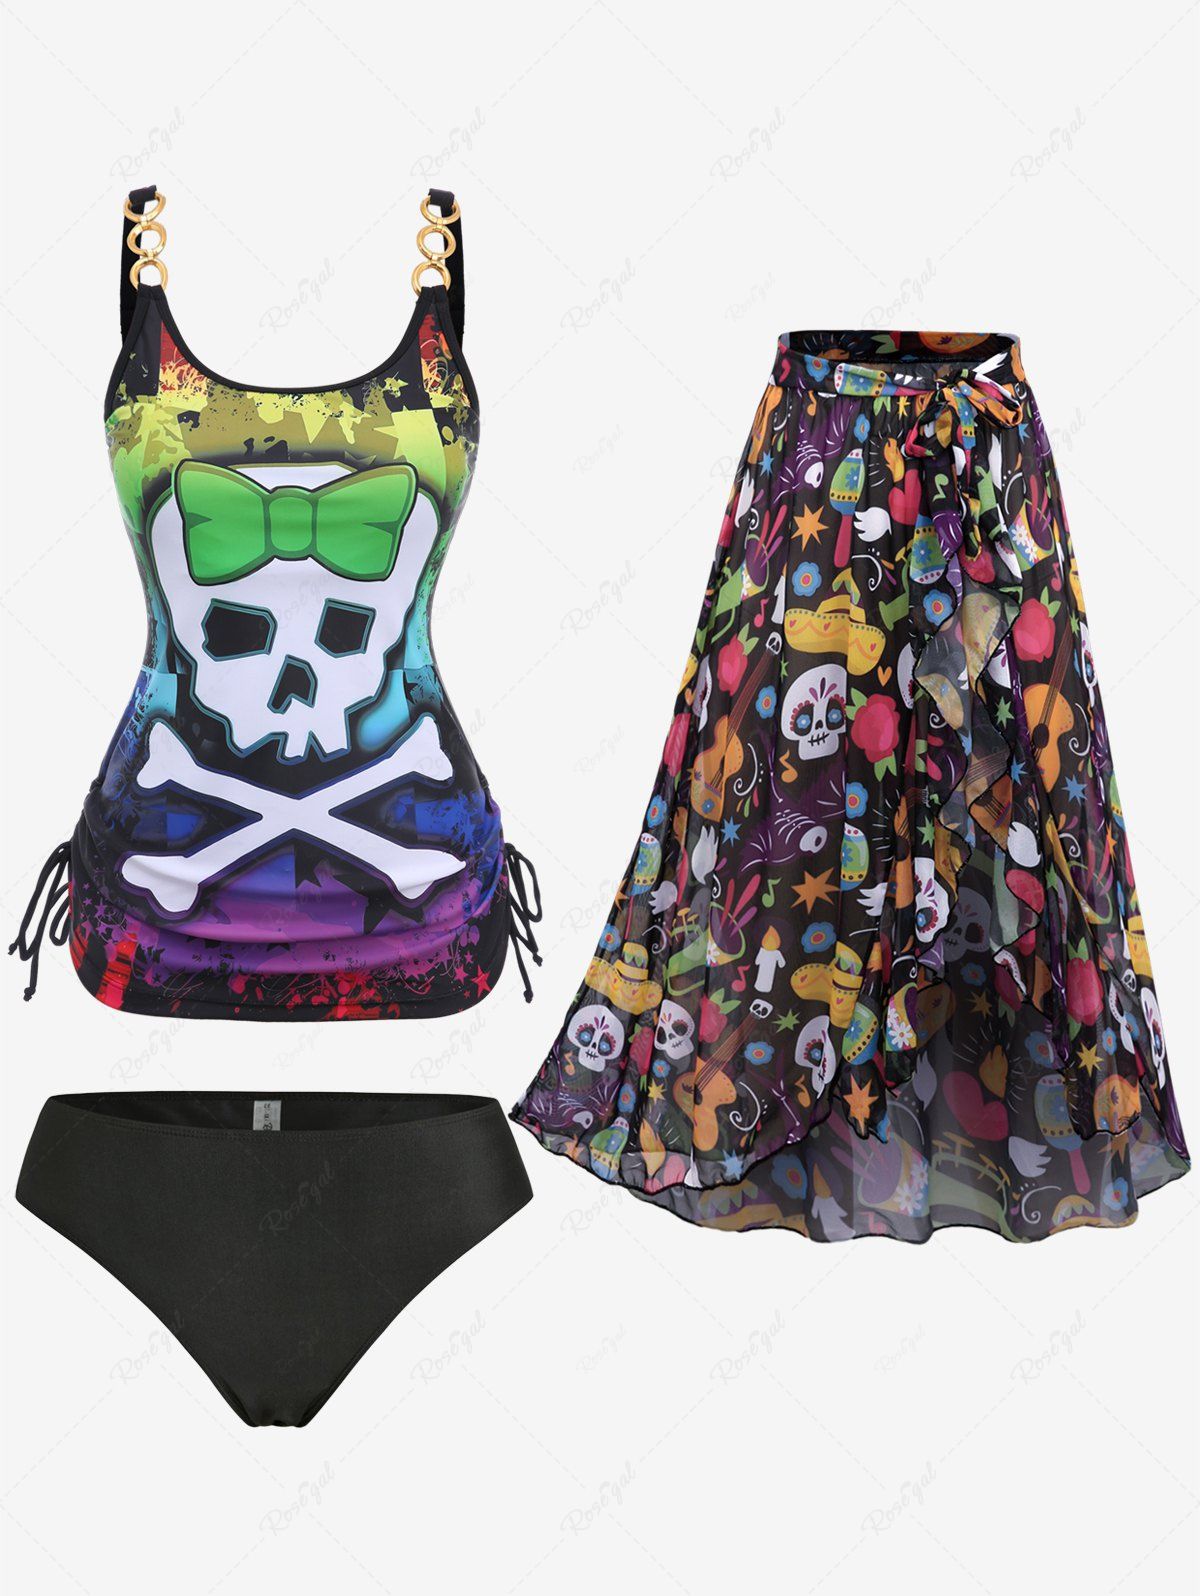 Affordable Skull Bowknot Colorblock Painting Splatter Print Cinched Top and Bottom Tankini Set and Floral Mesh Wrap Flounce Asymmetric Sarong Three Piece Swimsuit  